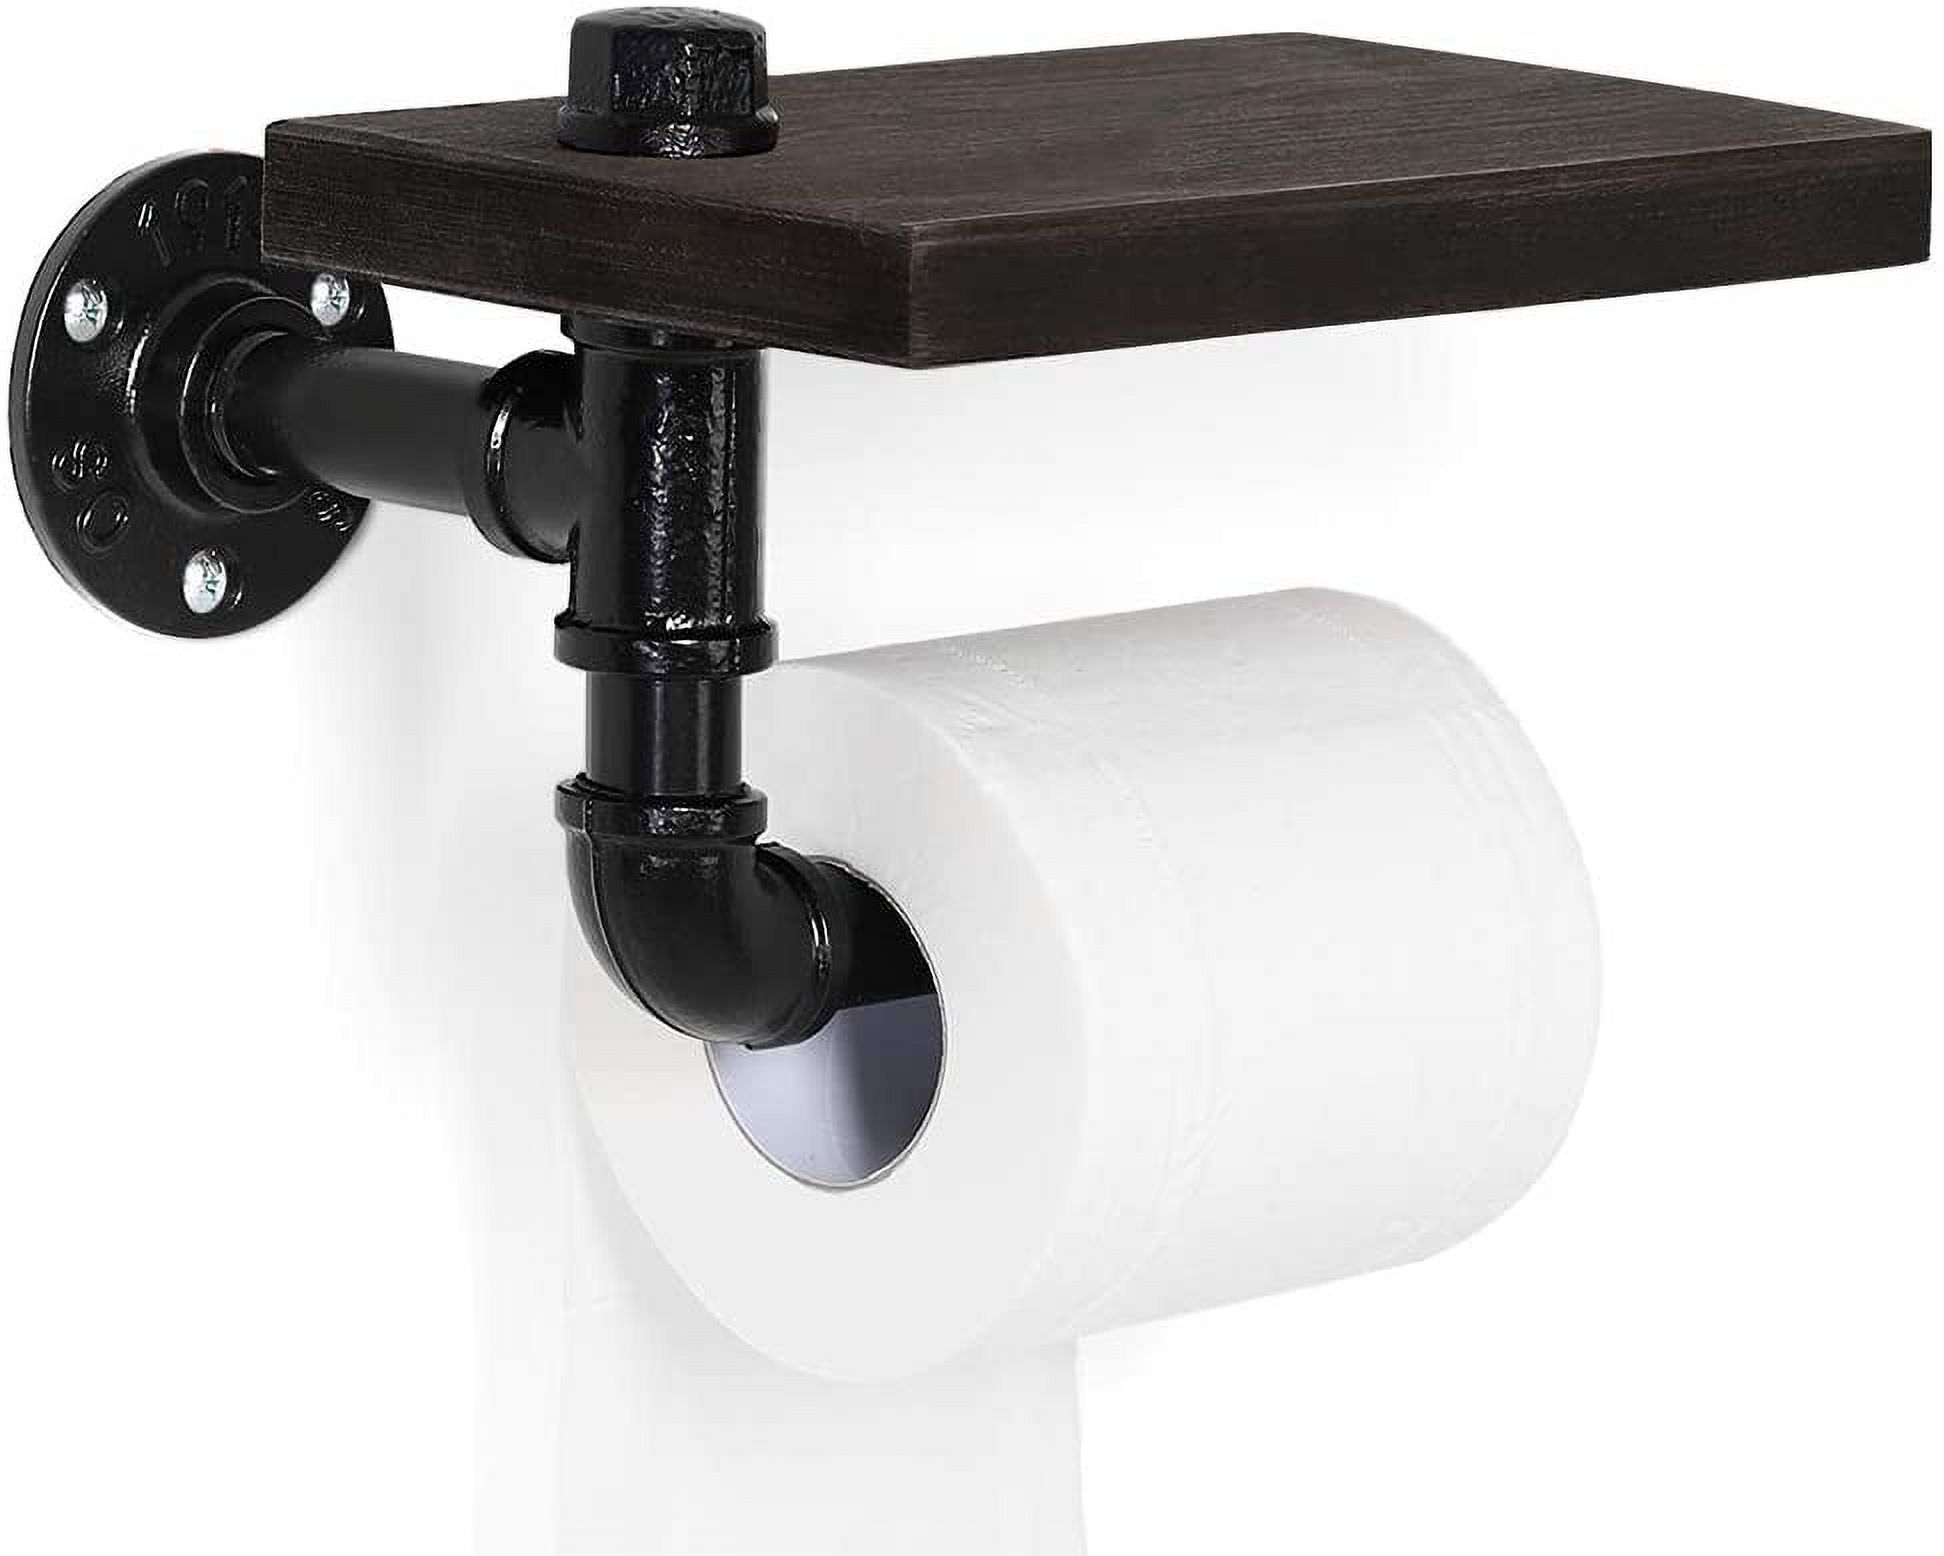 Wall Mounted Toilet Paper Holder with Rustic Wooden Shelf and Cast Iron Pipe by Oumilen - image 1 of 7